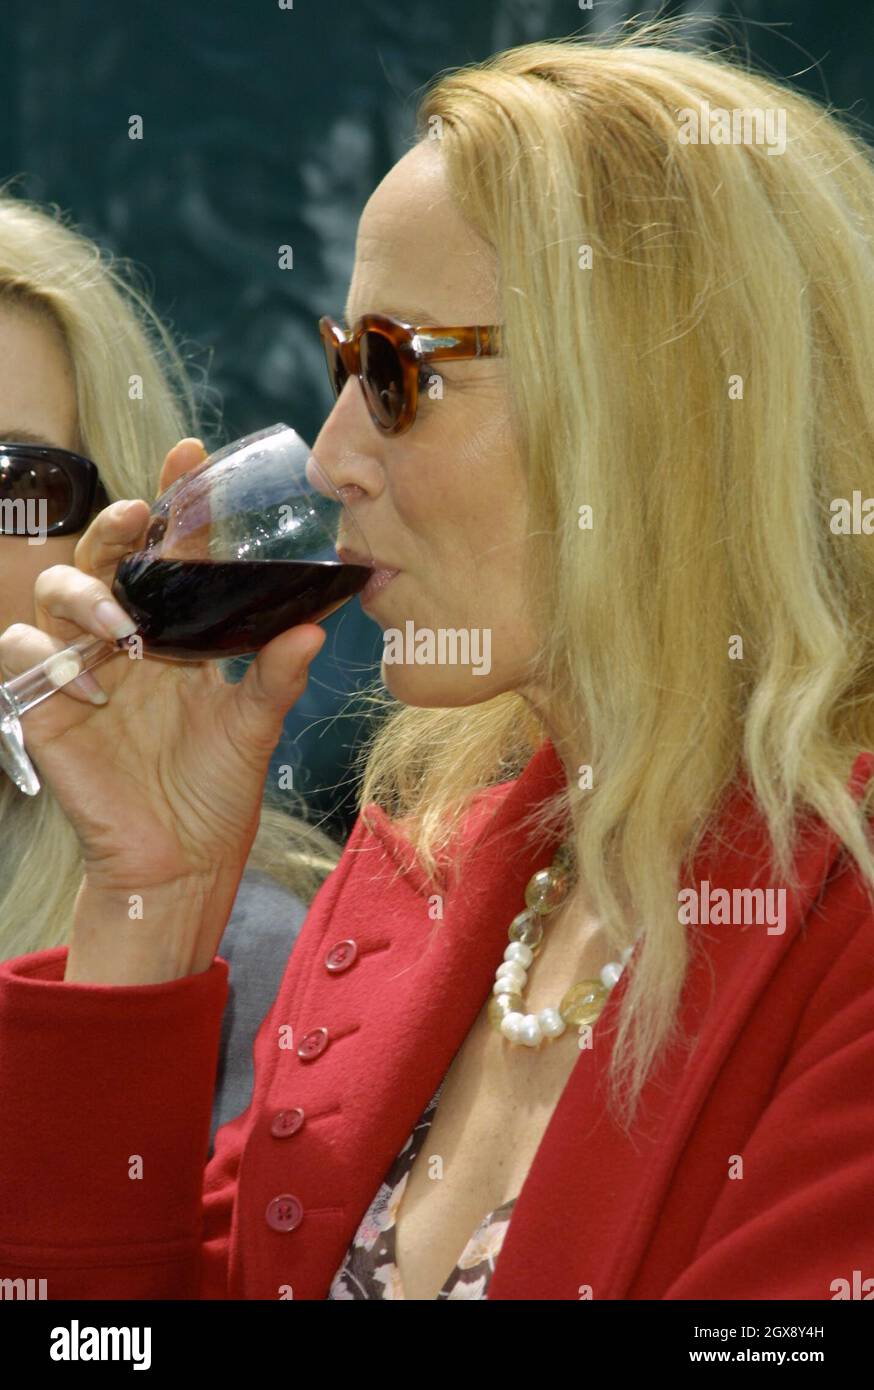 Jerry Hall  at the RHS Chelsea Flower show 2003, London. Headshot, drinking red wine. Â©Jean/allaction.co.uk  Stock Photo